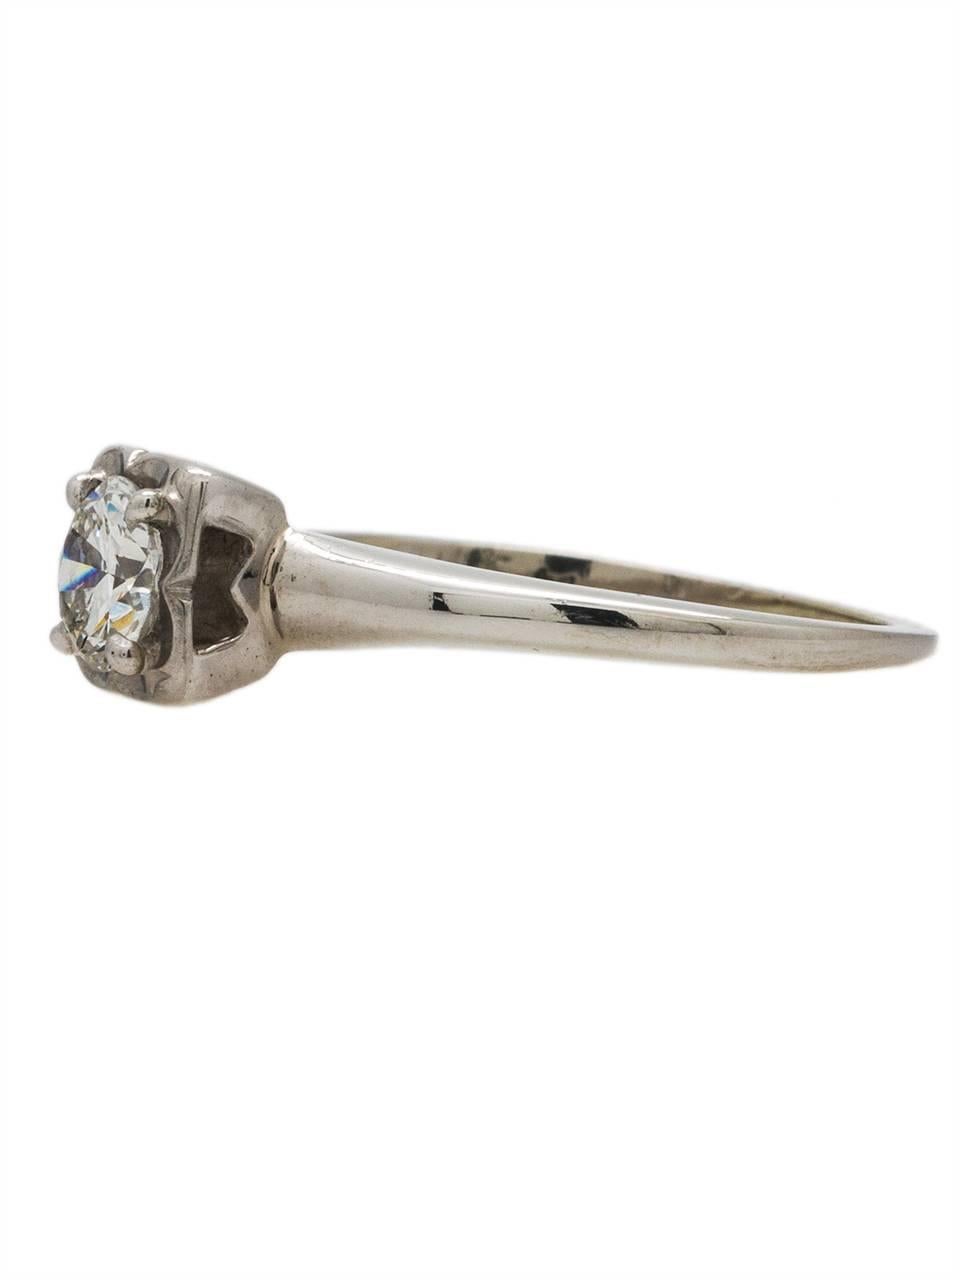 This simple solitaire engagement ring in 14k white gold is set with a brilliant 0.40ct modern round cut diamond, G/SI1. The elevated mounting has a romantic geometric Art Deco cutout gallery with ridge detail. An elegant tulip flower illusion